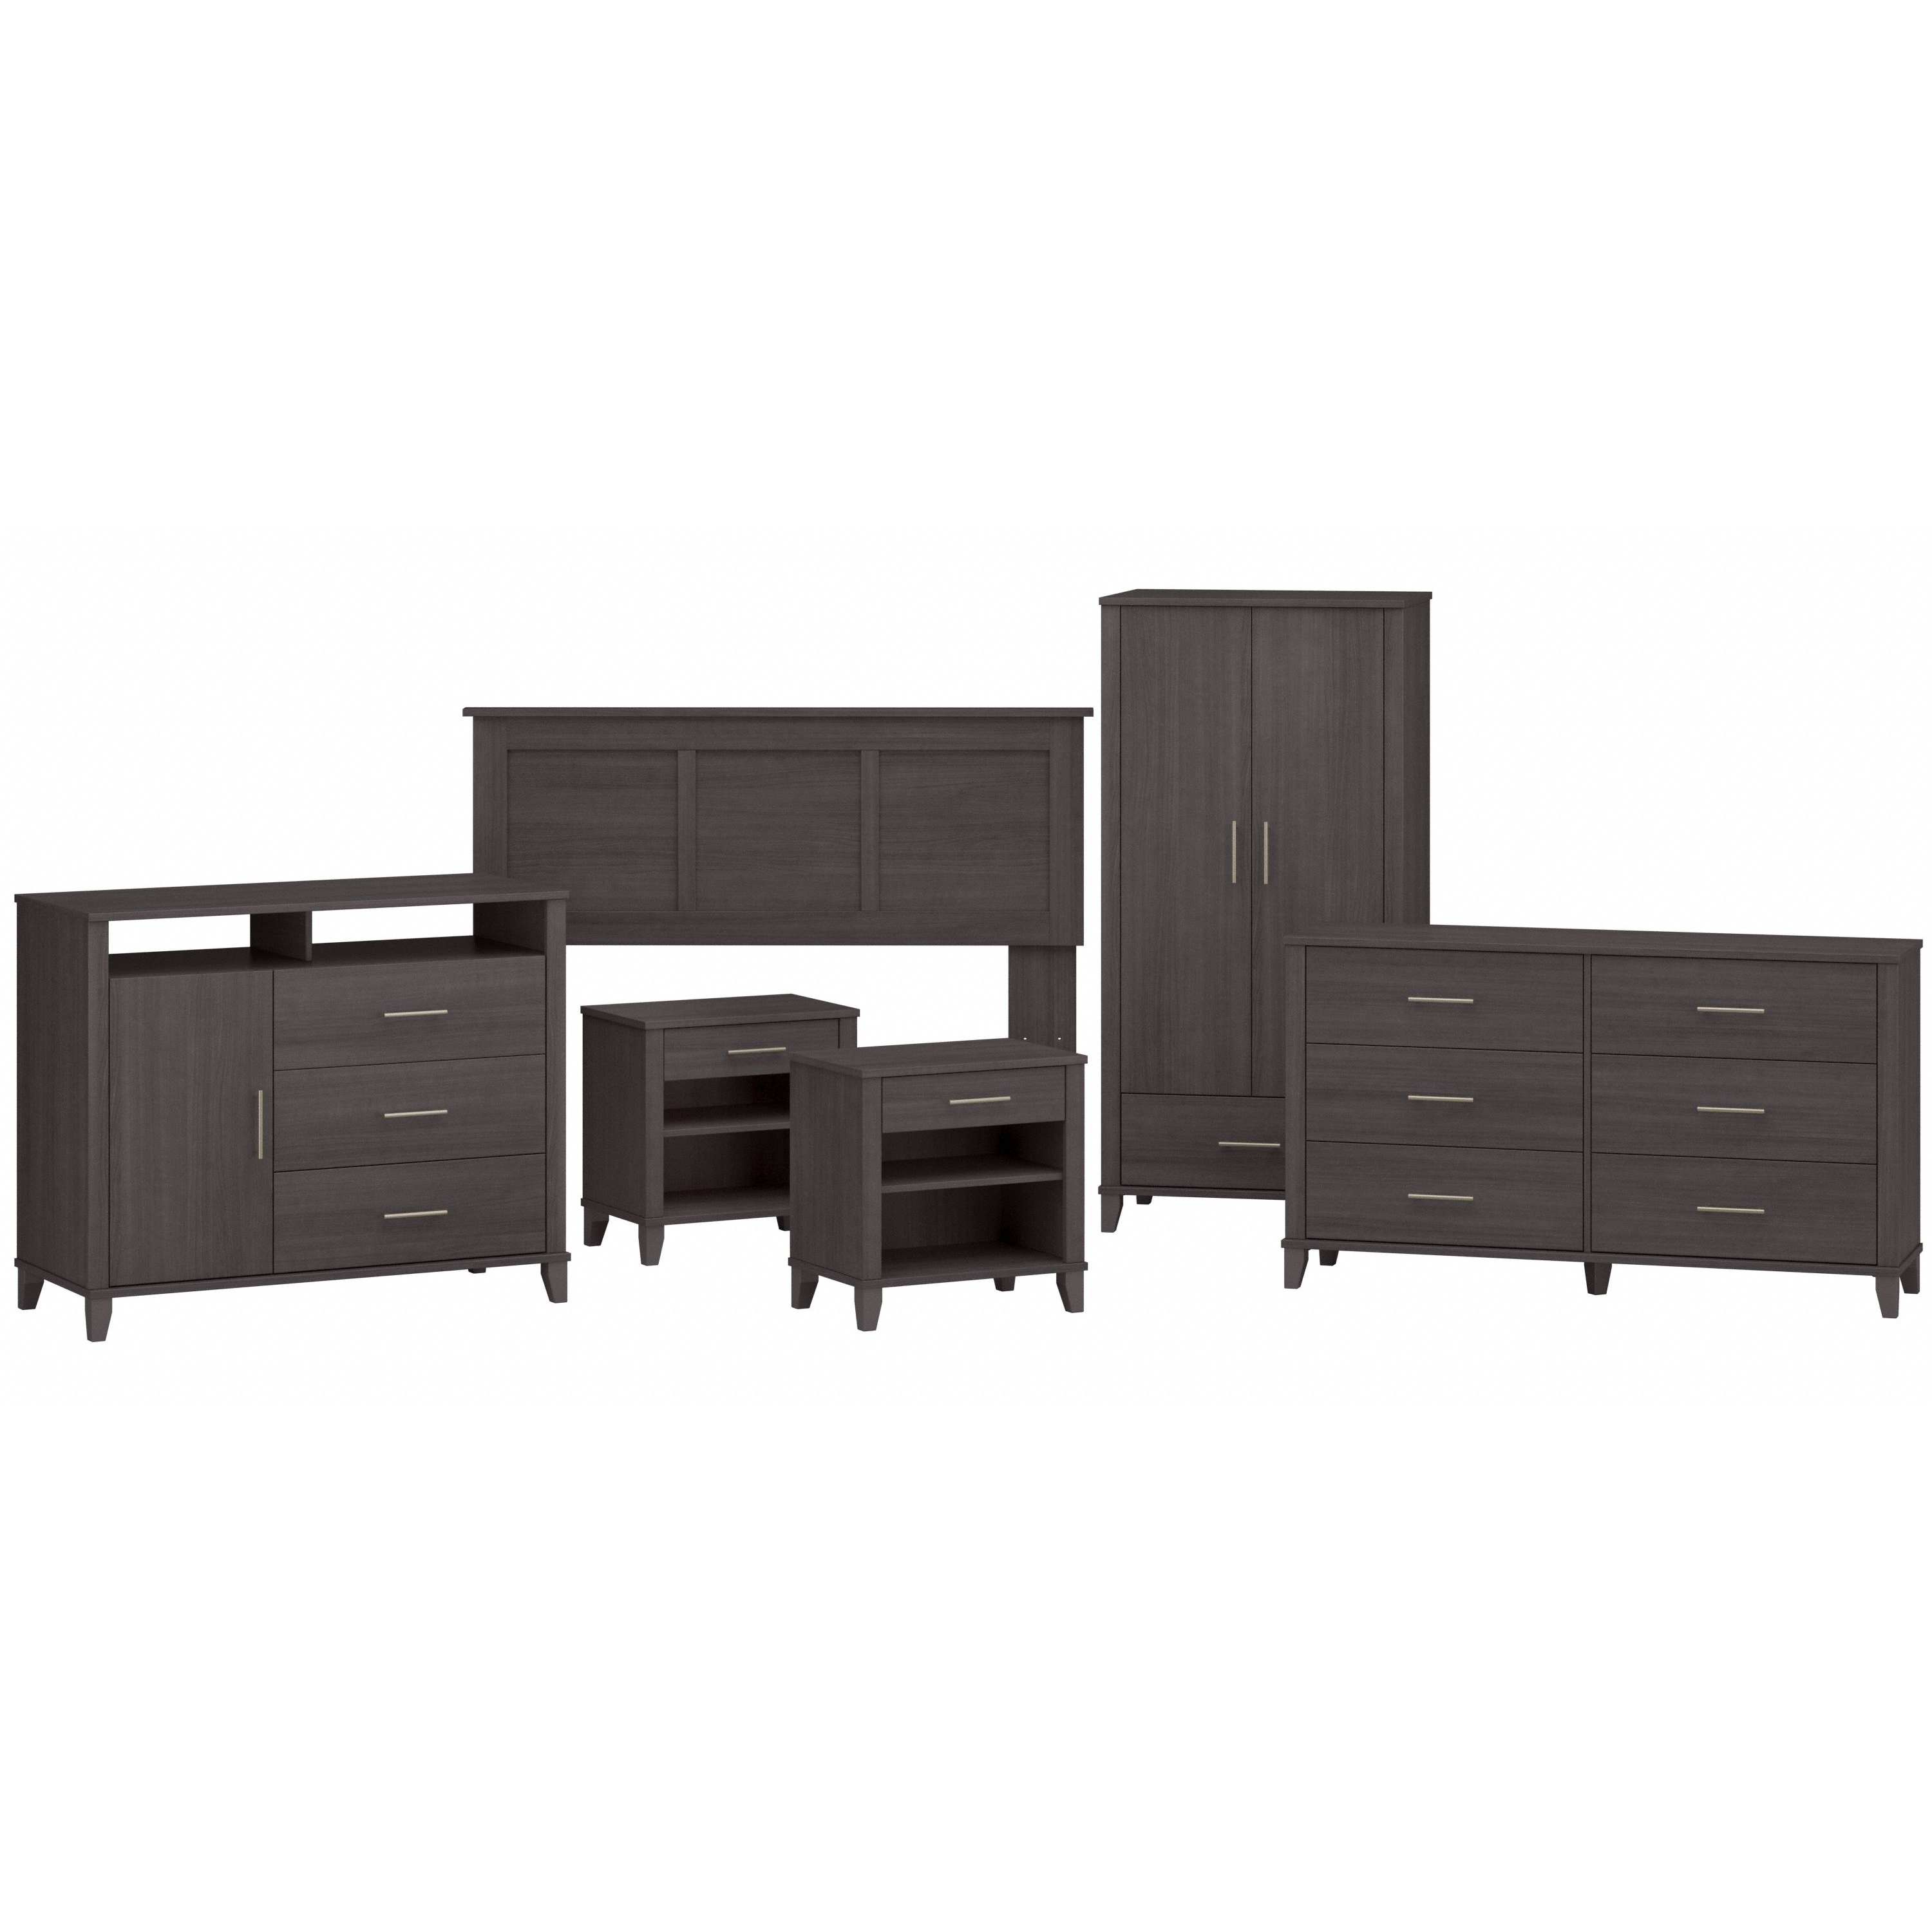 Shop Bush Furniture Somerset 6 Piece Bedroom Set with Full/Queen Size Headboard and Storage 02 SET037SG #color_storm gray